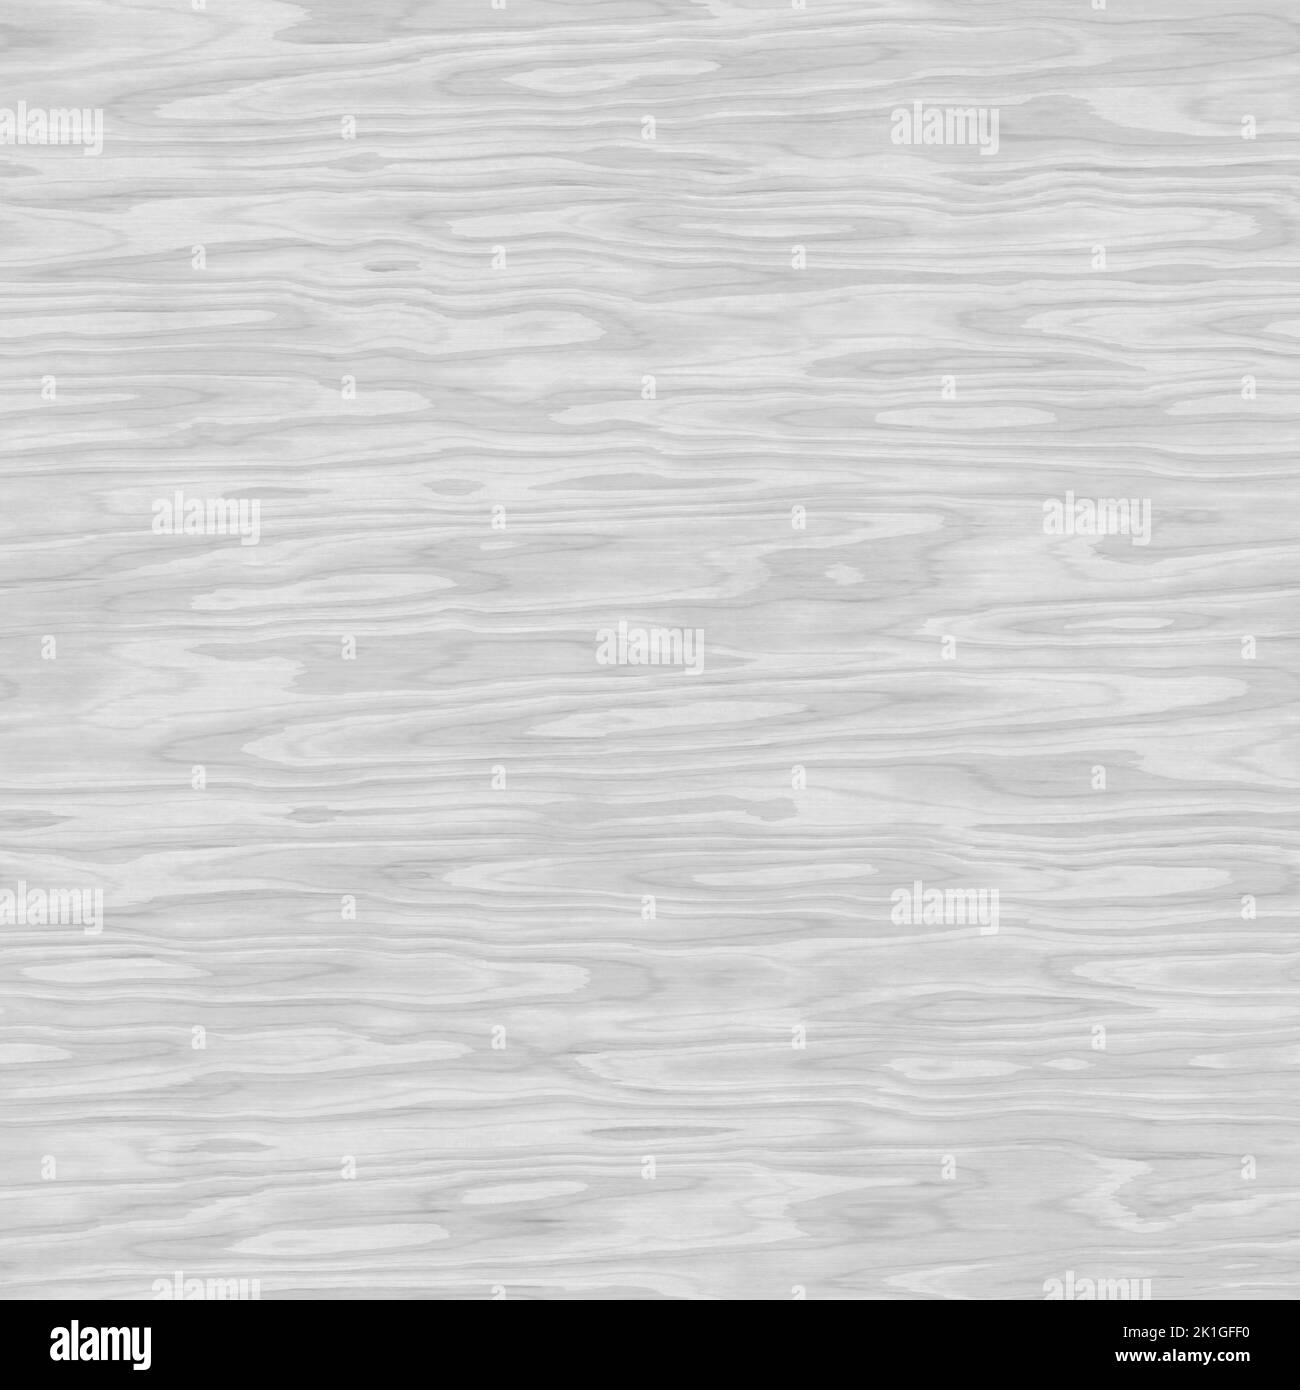 Bump map water stains texture. High resolution Stock Photo